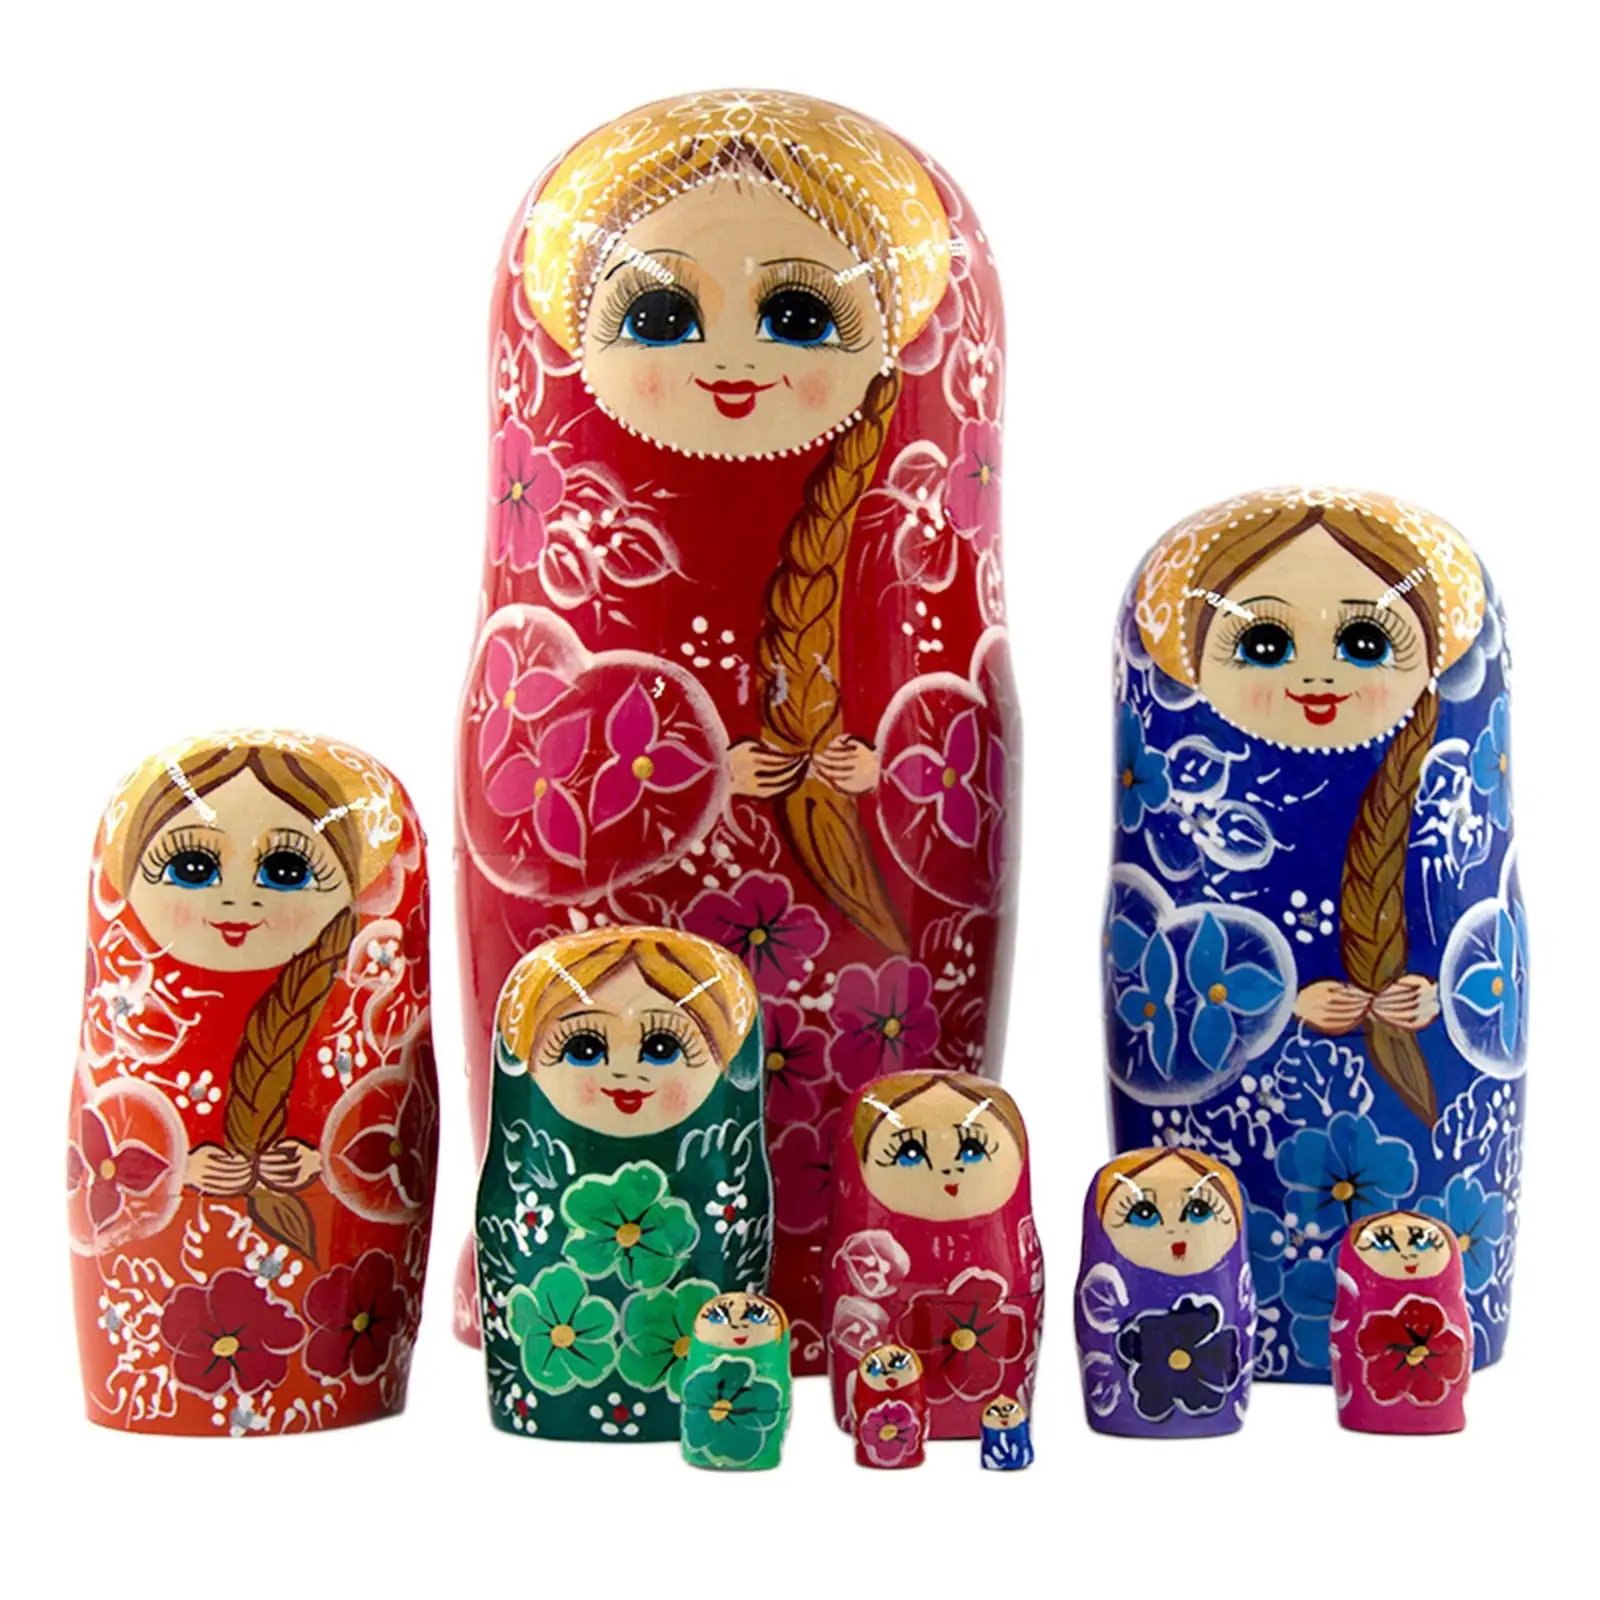 10x Chic Russian Nesting Dolls Matryoshka Doll Decoration Handmade Multipurpose Collectibles Wooden for Themed Party Bar Bedroom